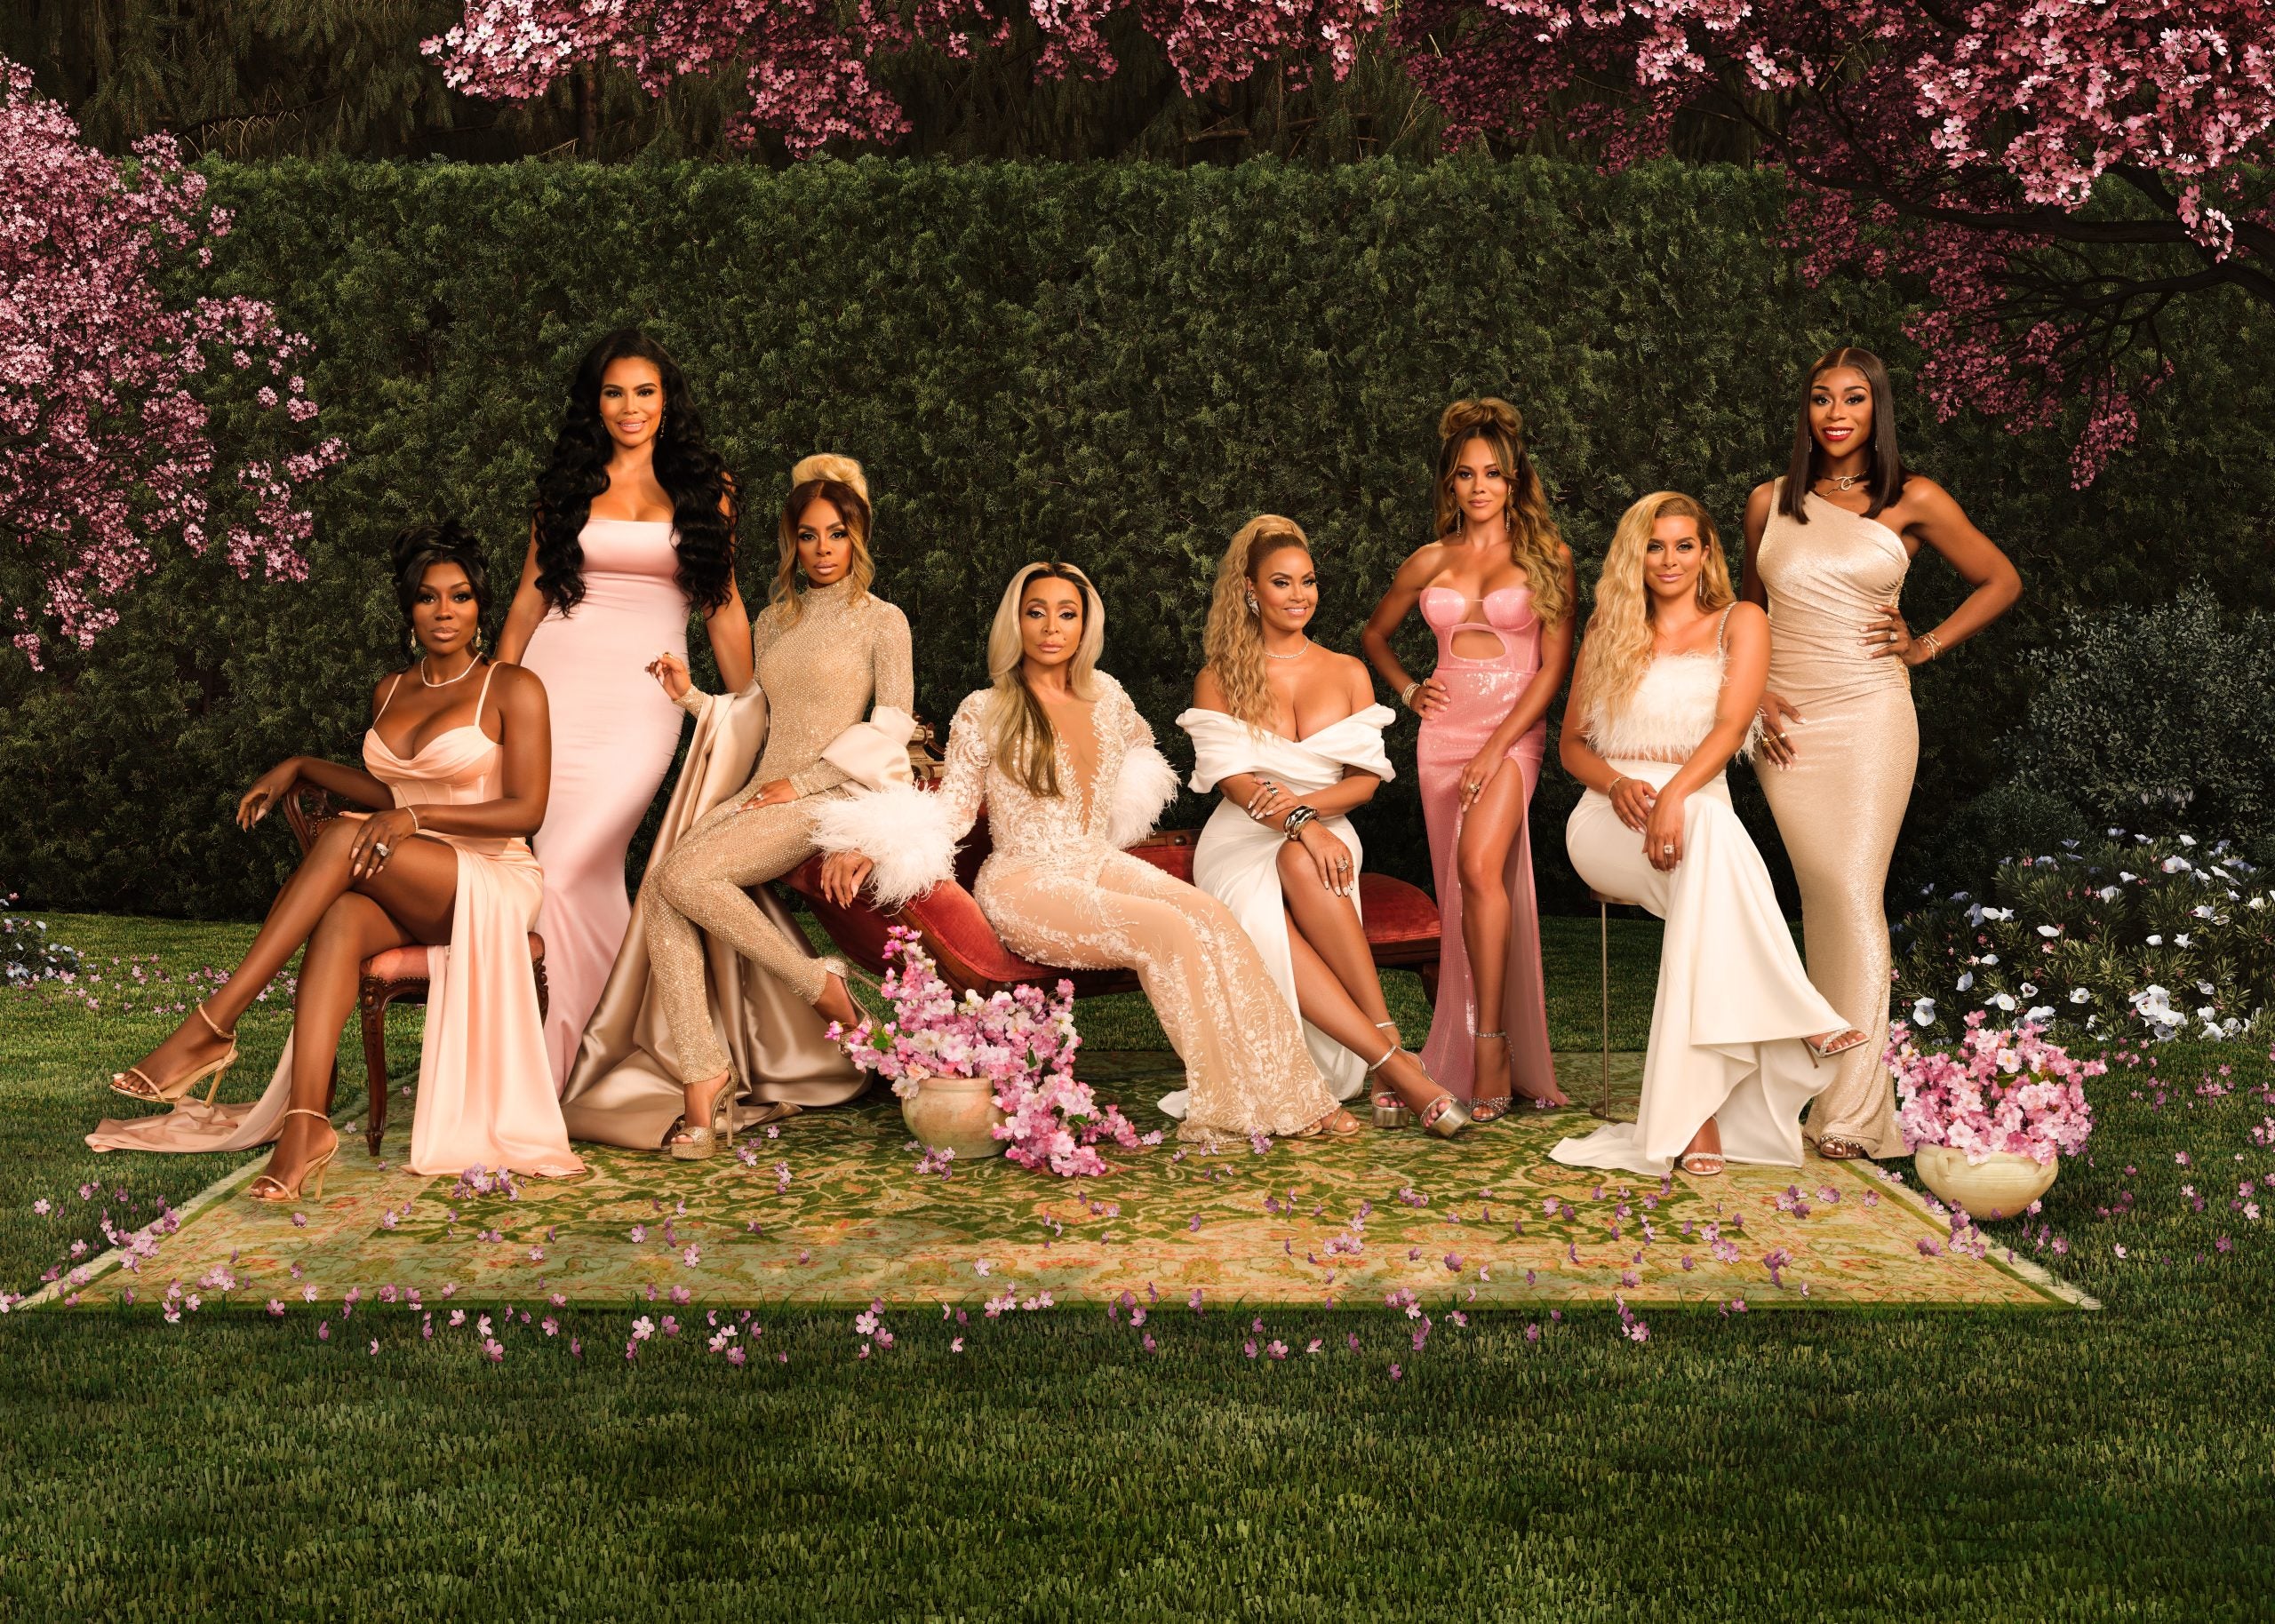 Watch The Official Trailer For Season 8 Of ‘The Real Housewives Of Potomac’